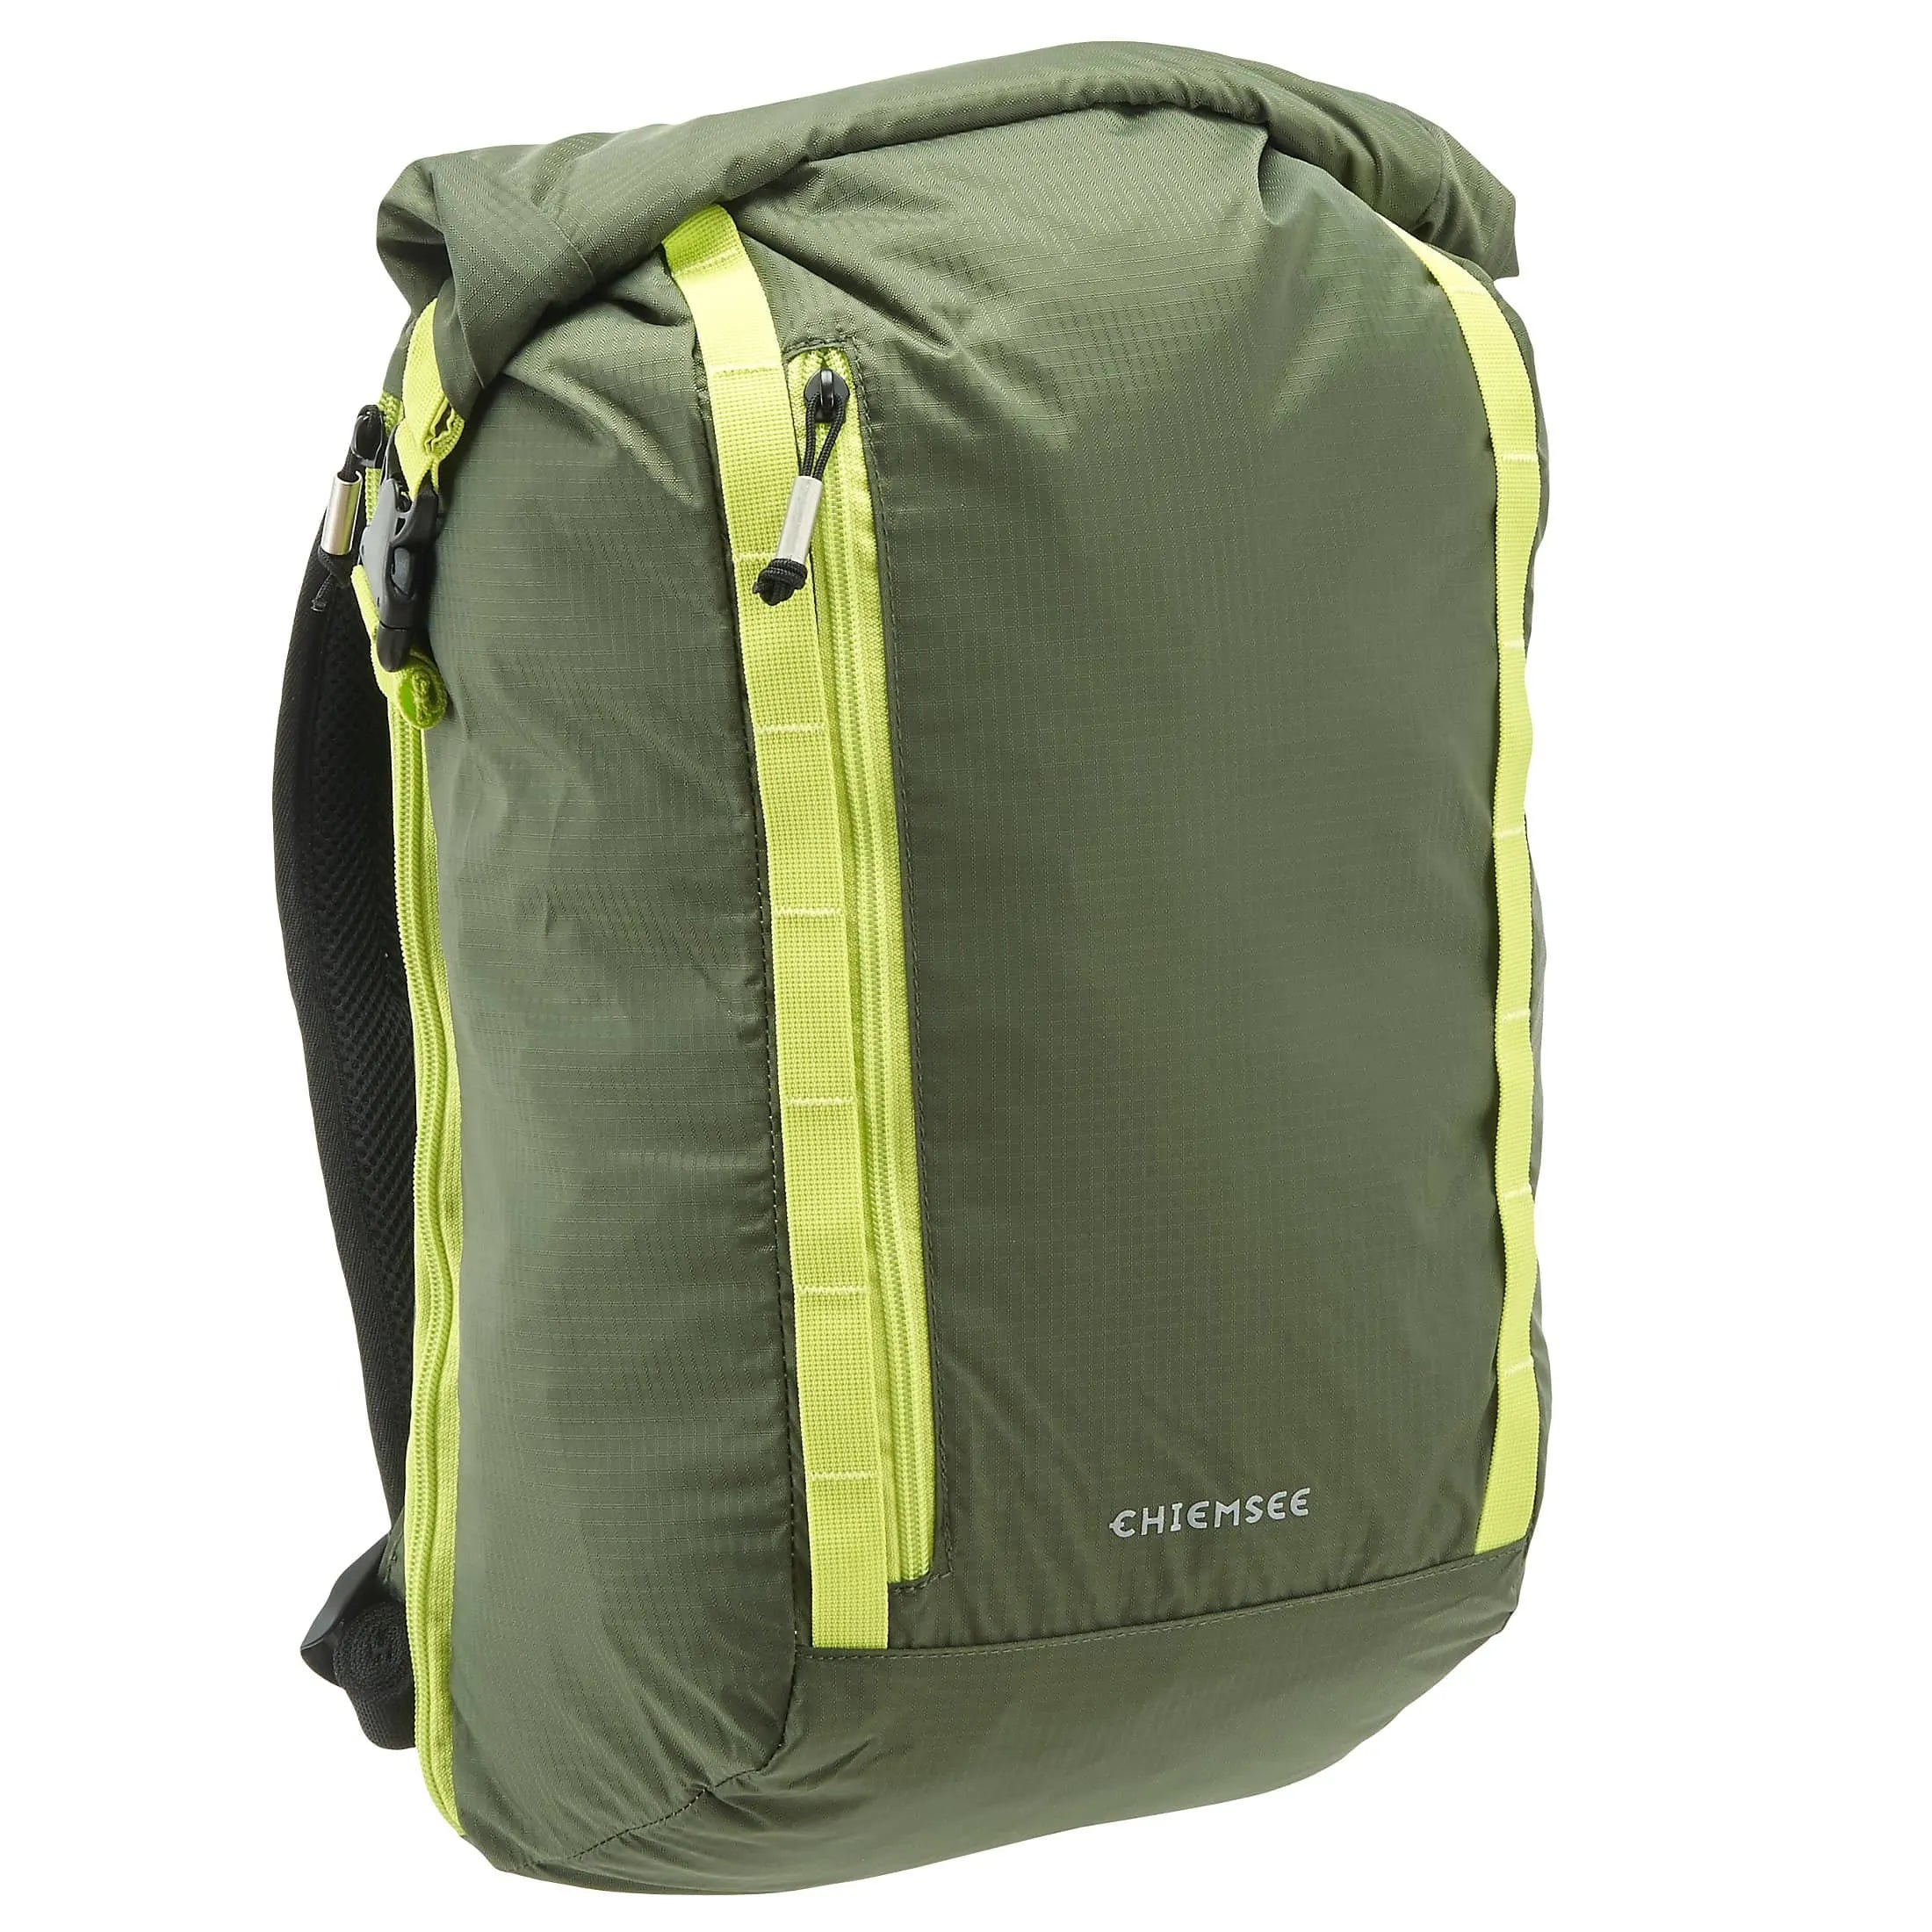 Chiemsee Sports & Travel Bags Daypack Backpack 50 cm - dusty olive